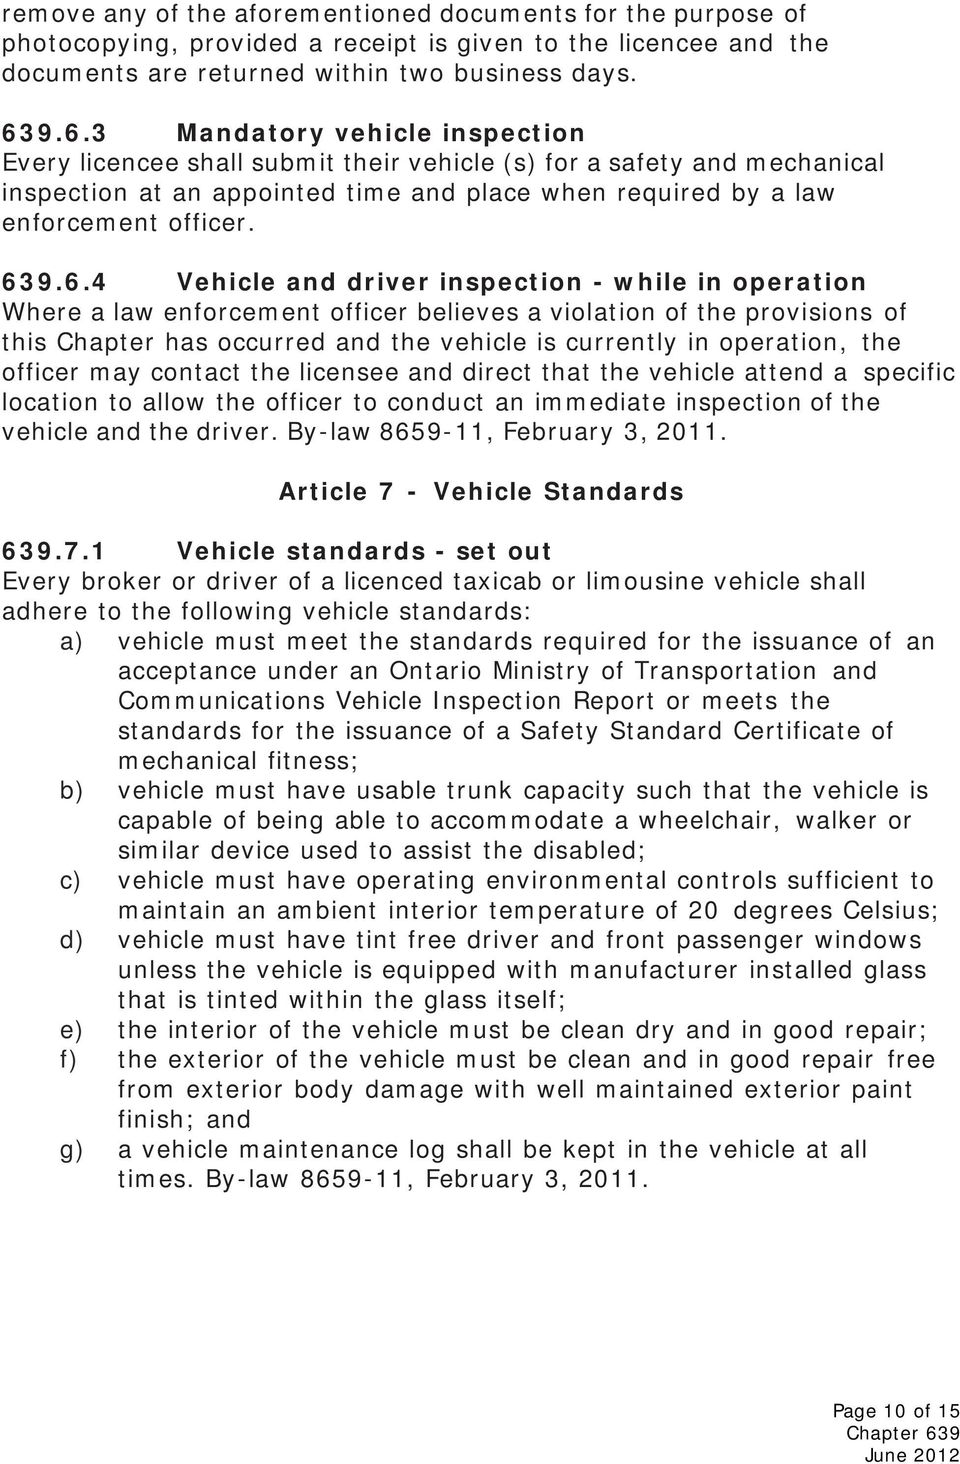 6.4 Vehicle and driver inspection - while in operation Where a law enforcement officer believes a violation of the provisions of this Chapter has occurred and the vehicle is currently in operation,